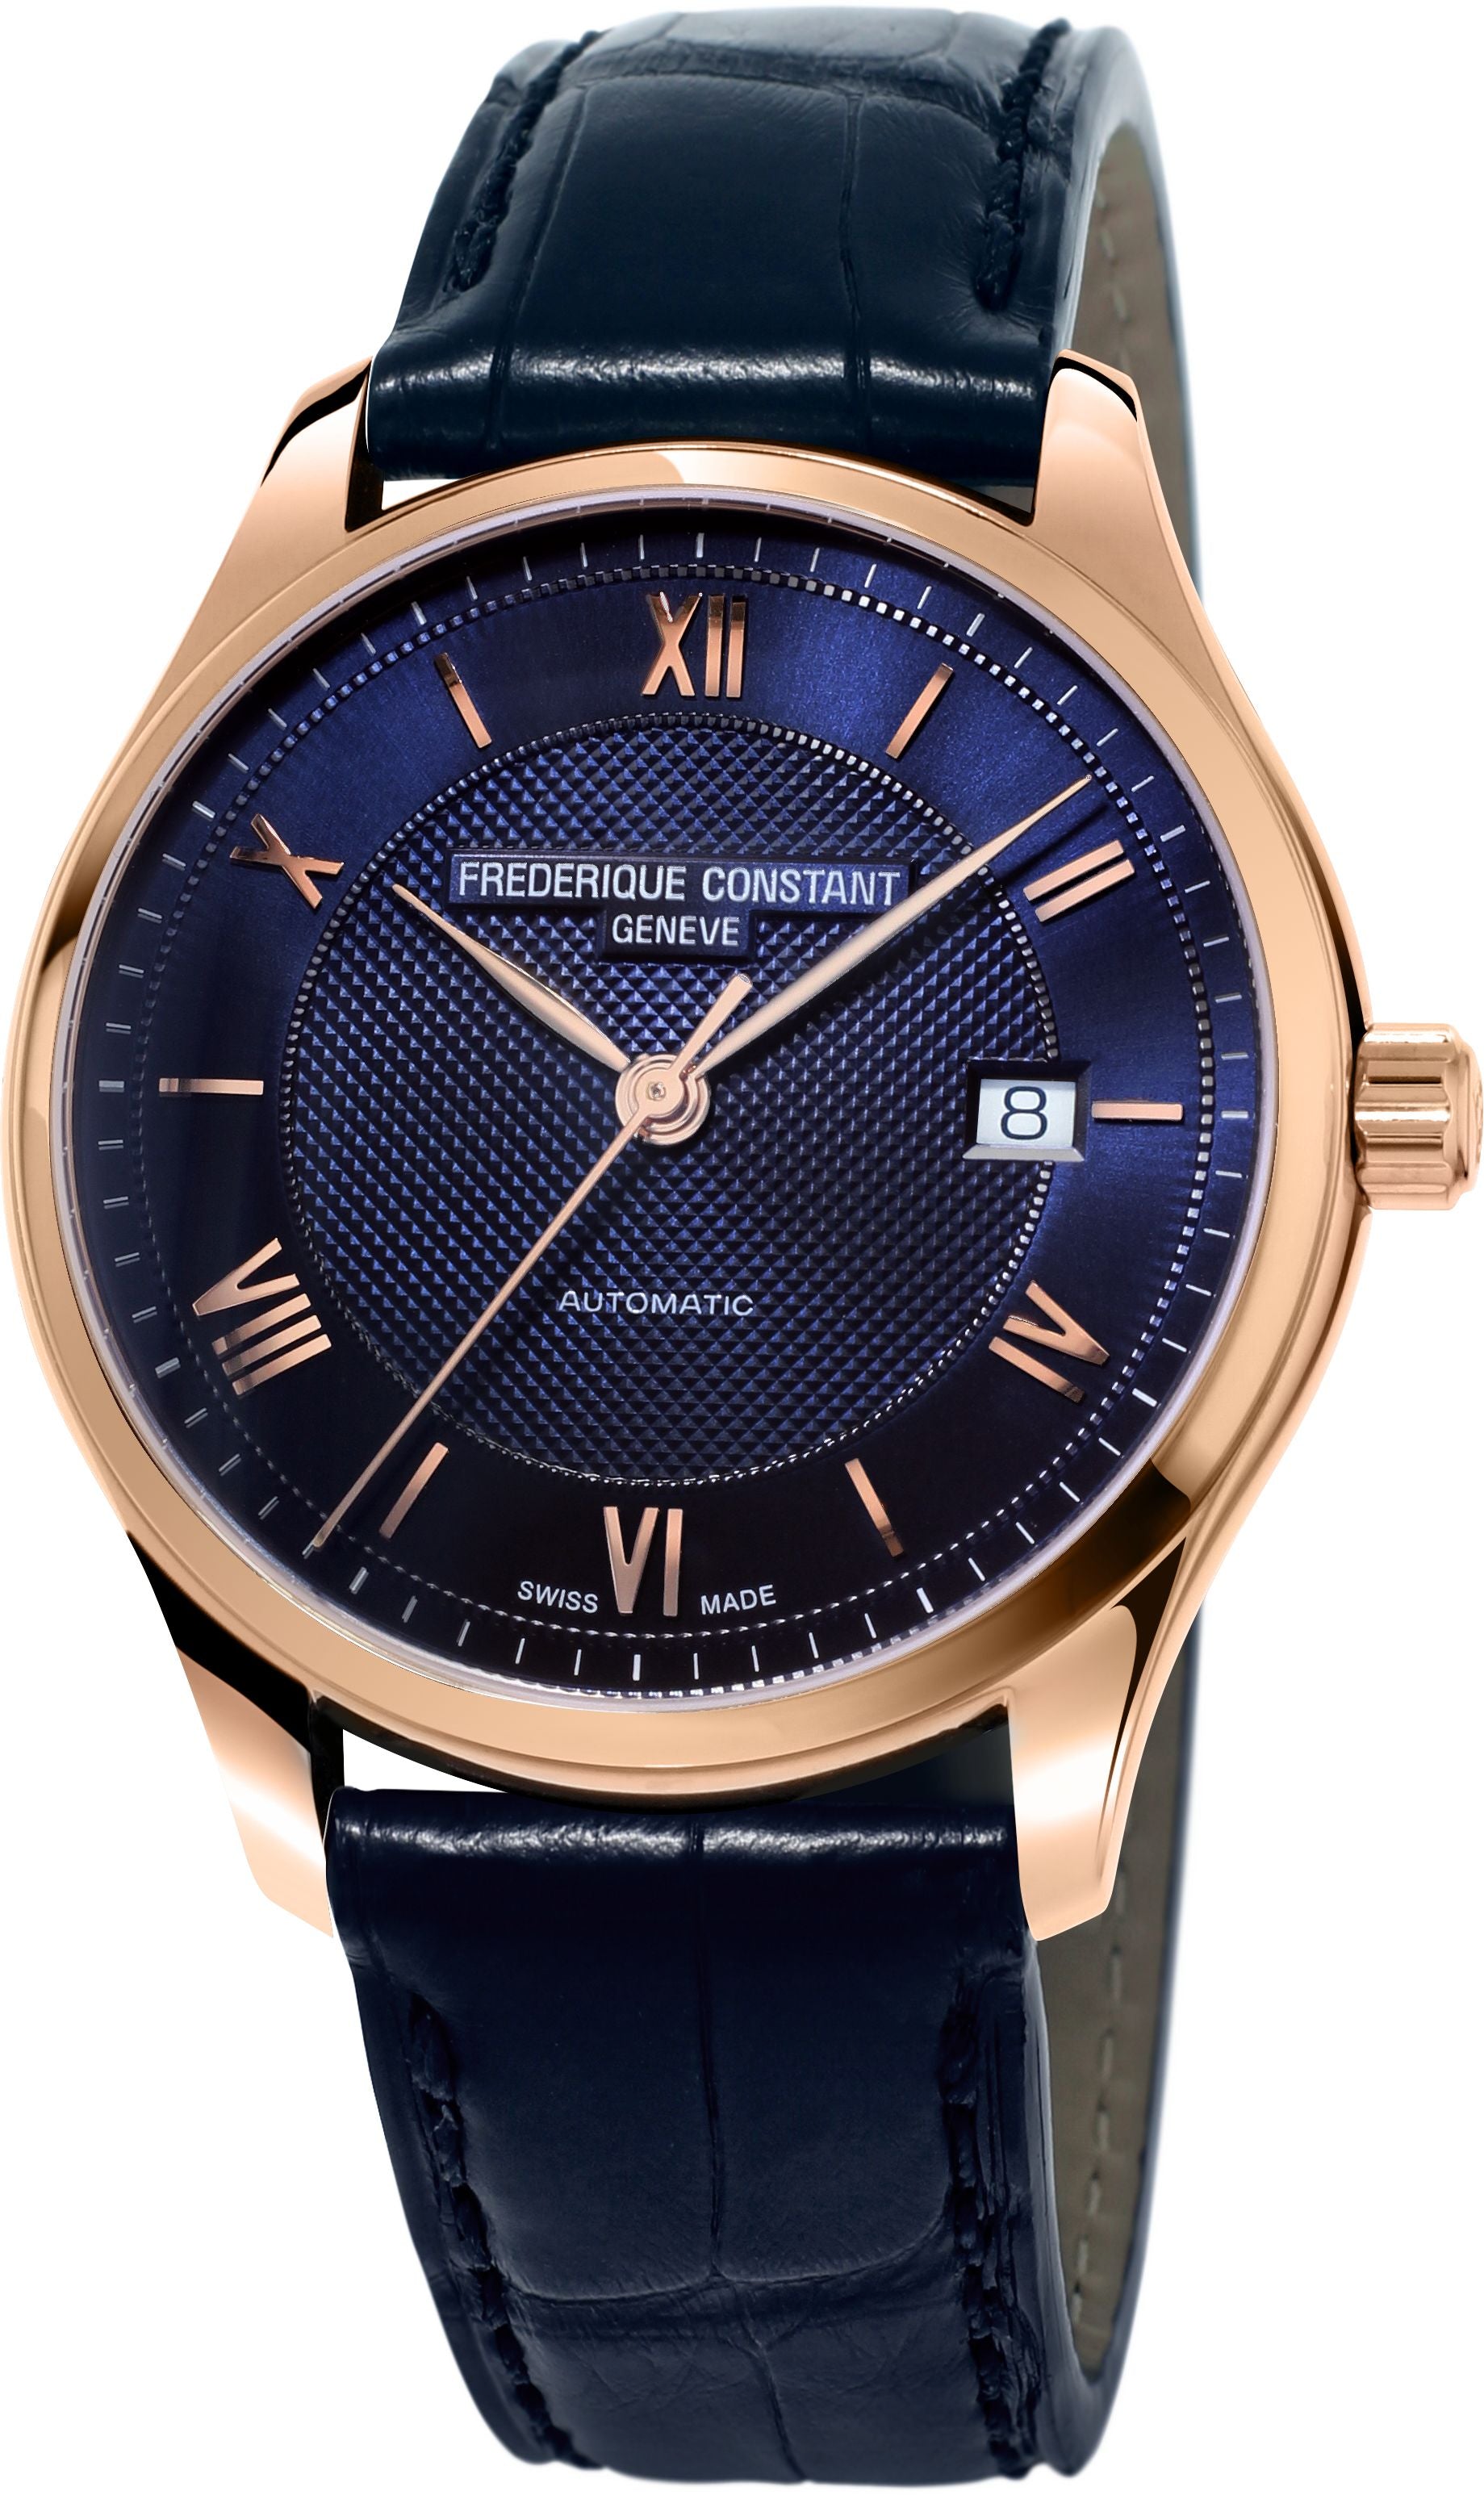 FREDERIQUE CONSTANT MENS STAINLESS STEEL Rose Gold-Tone Automatic CLASSICS Leather Strap